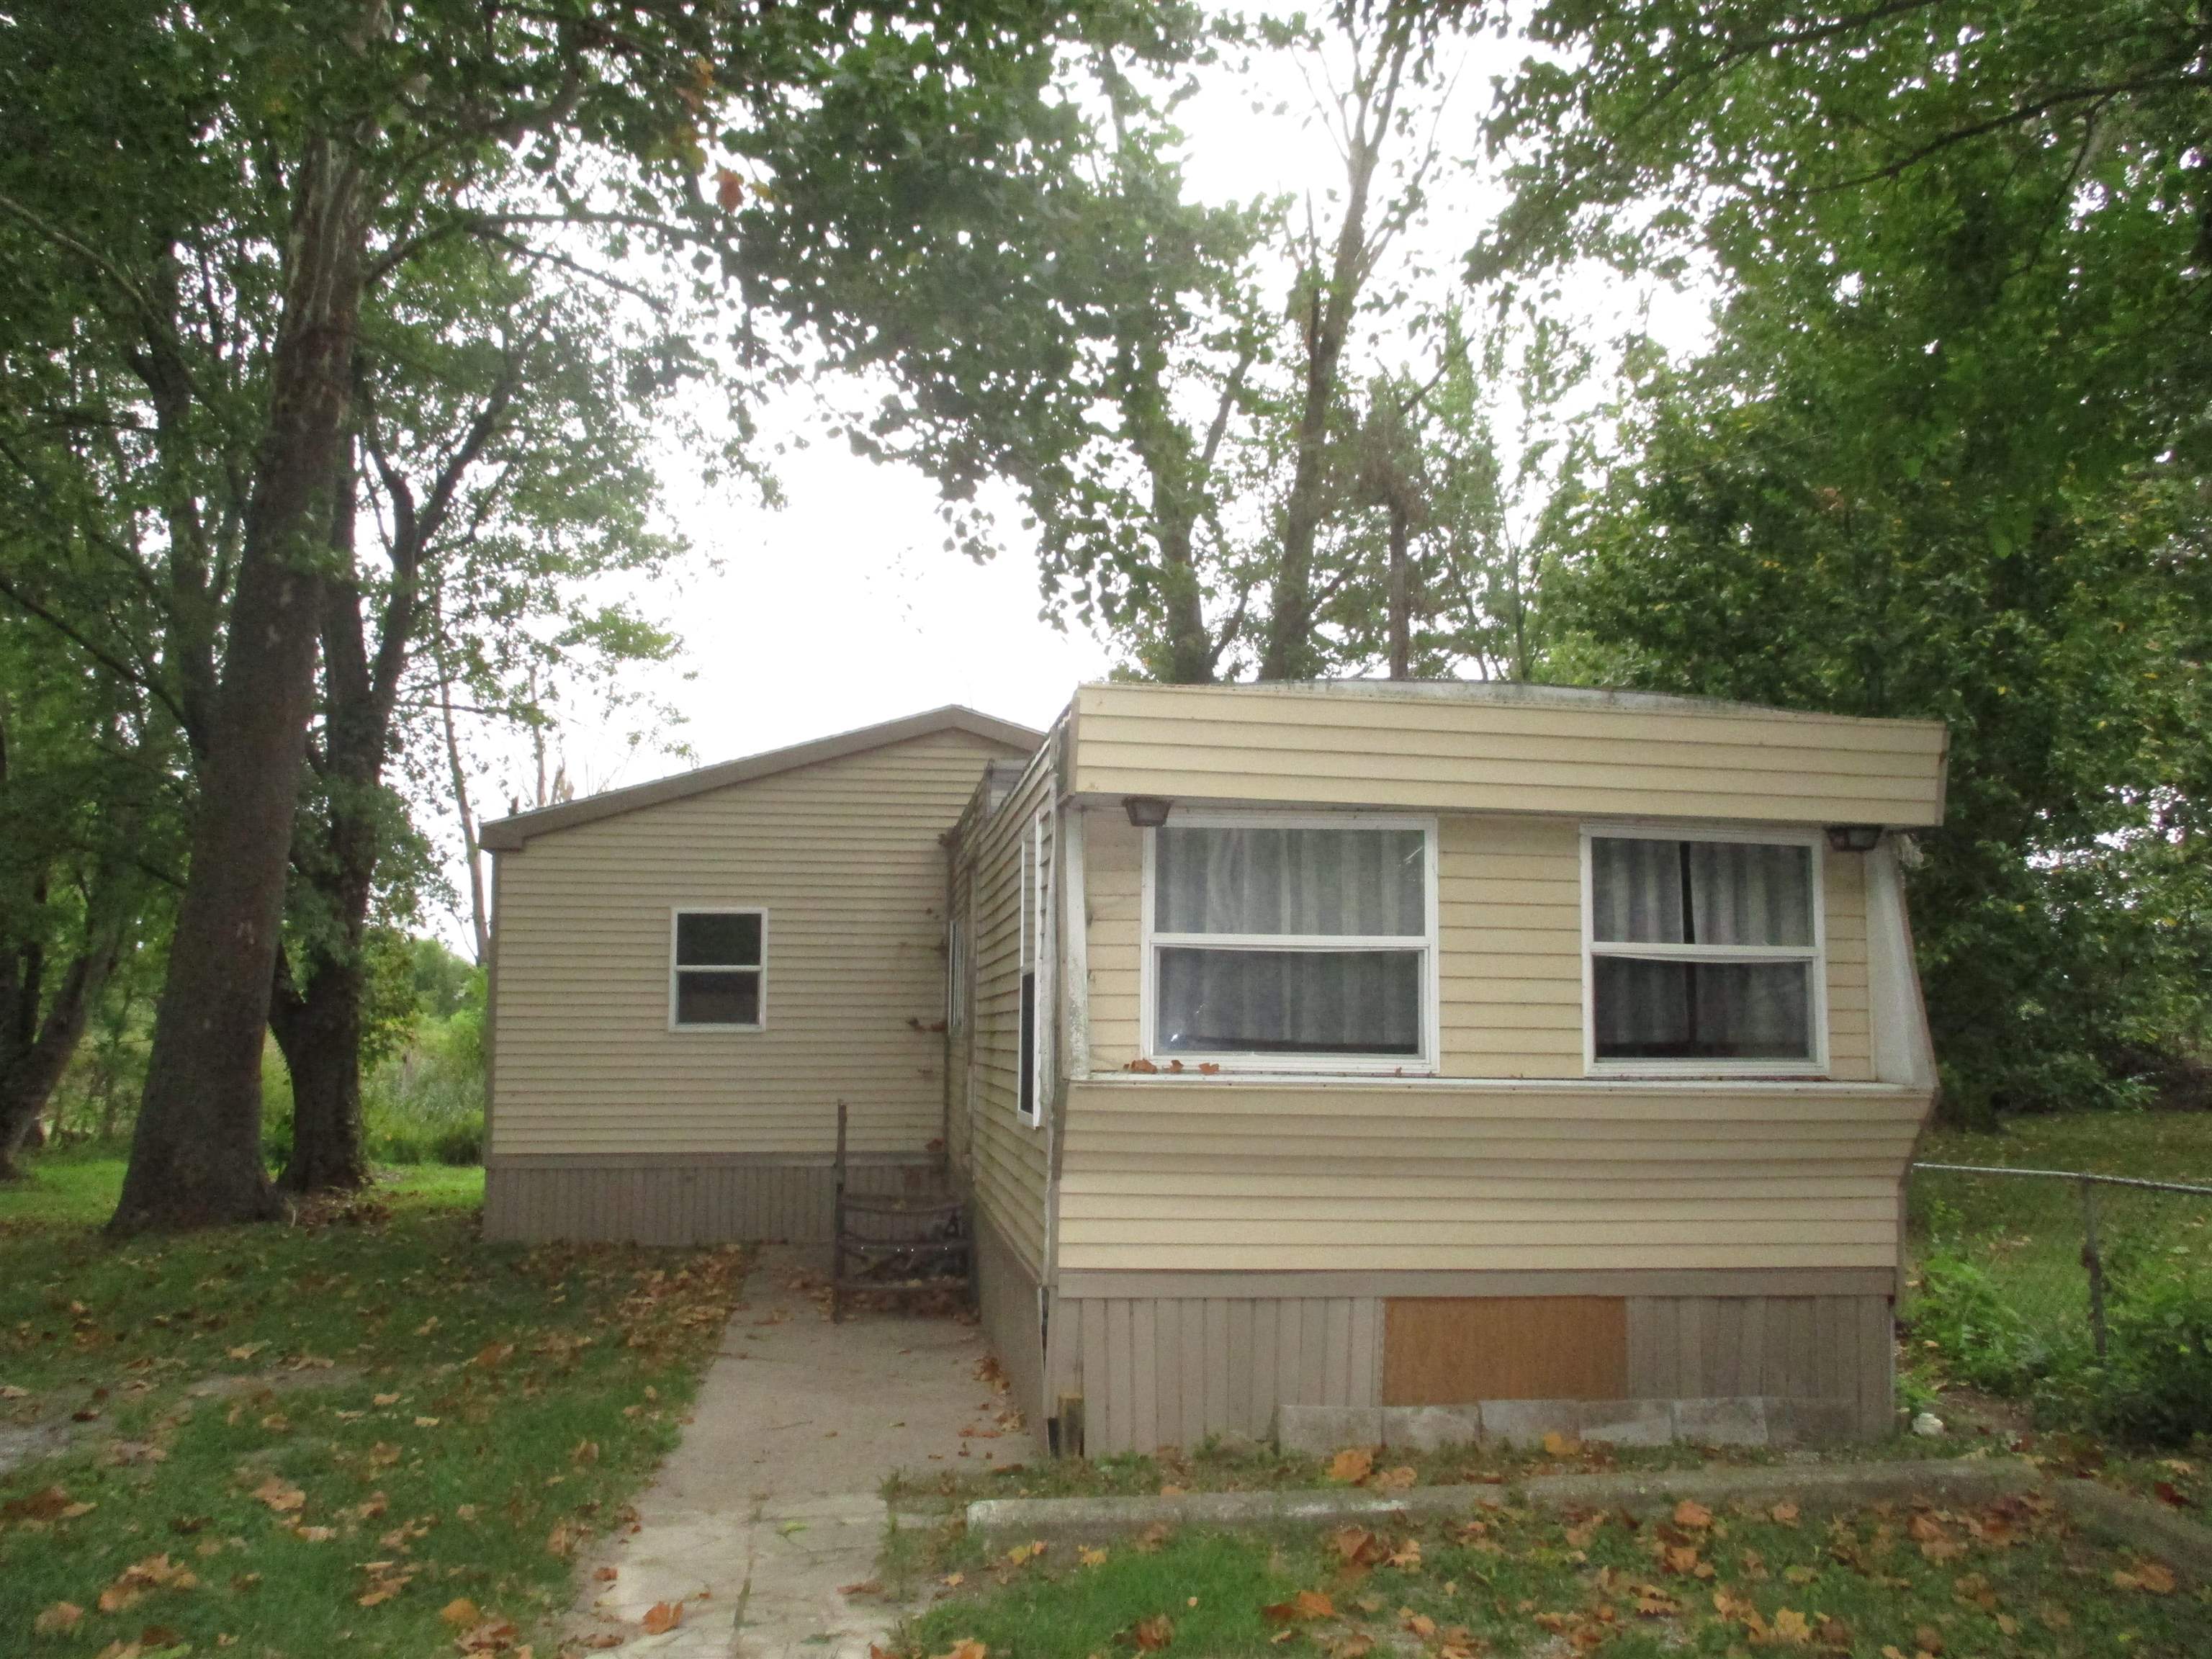 4520 W 200 S, Albion, IN 46701